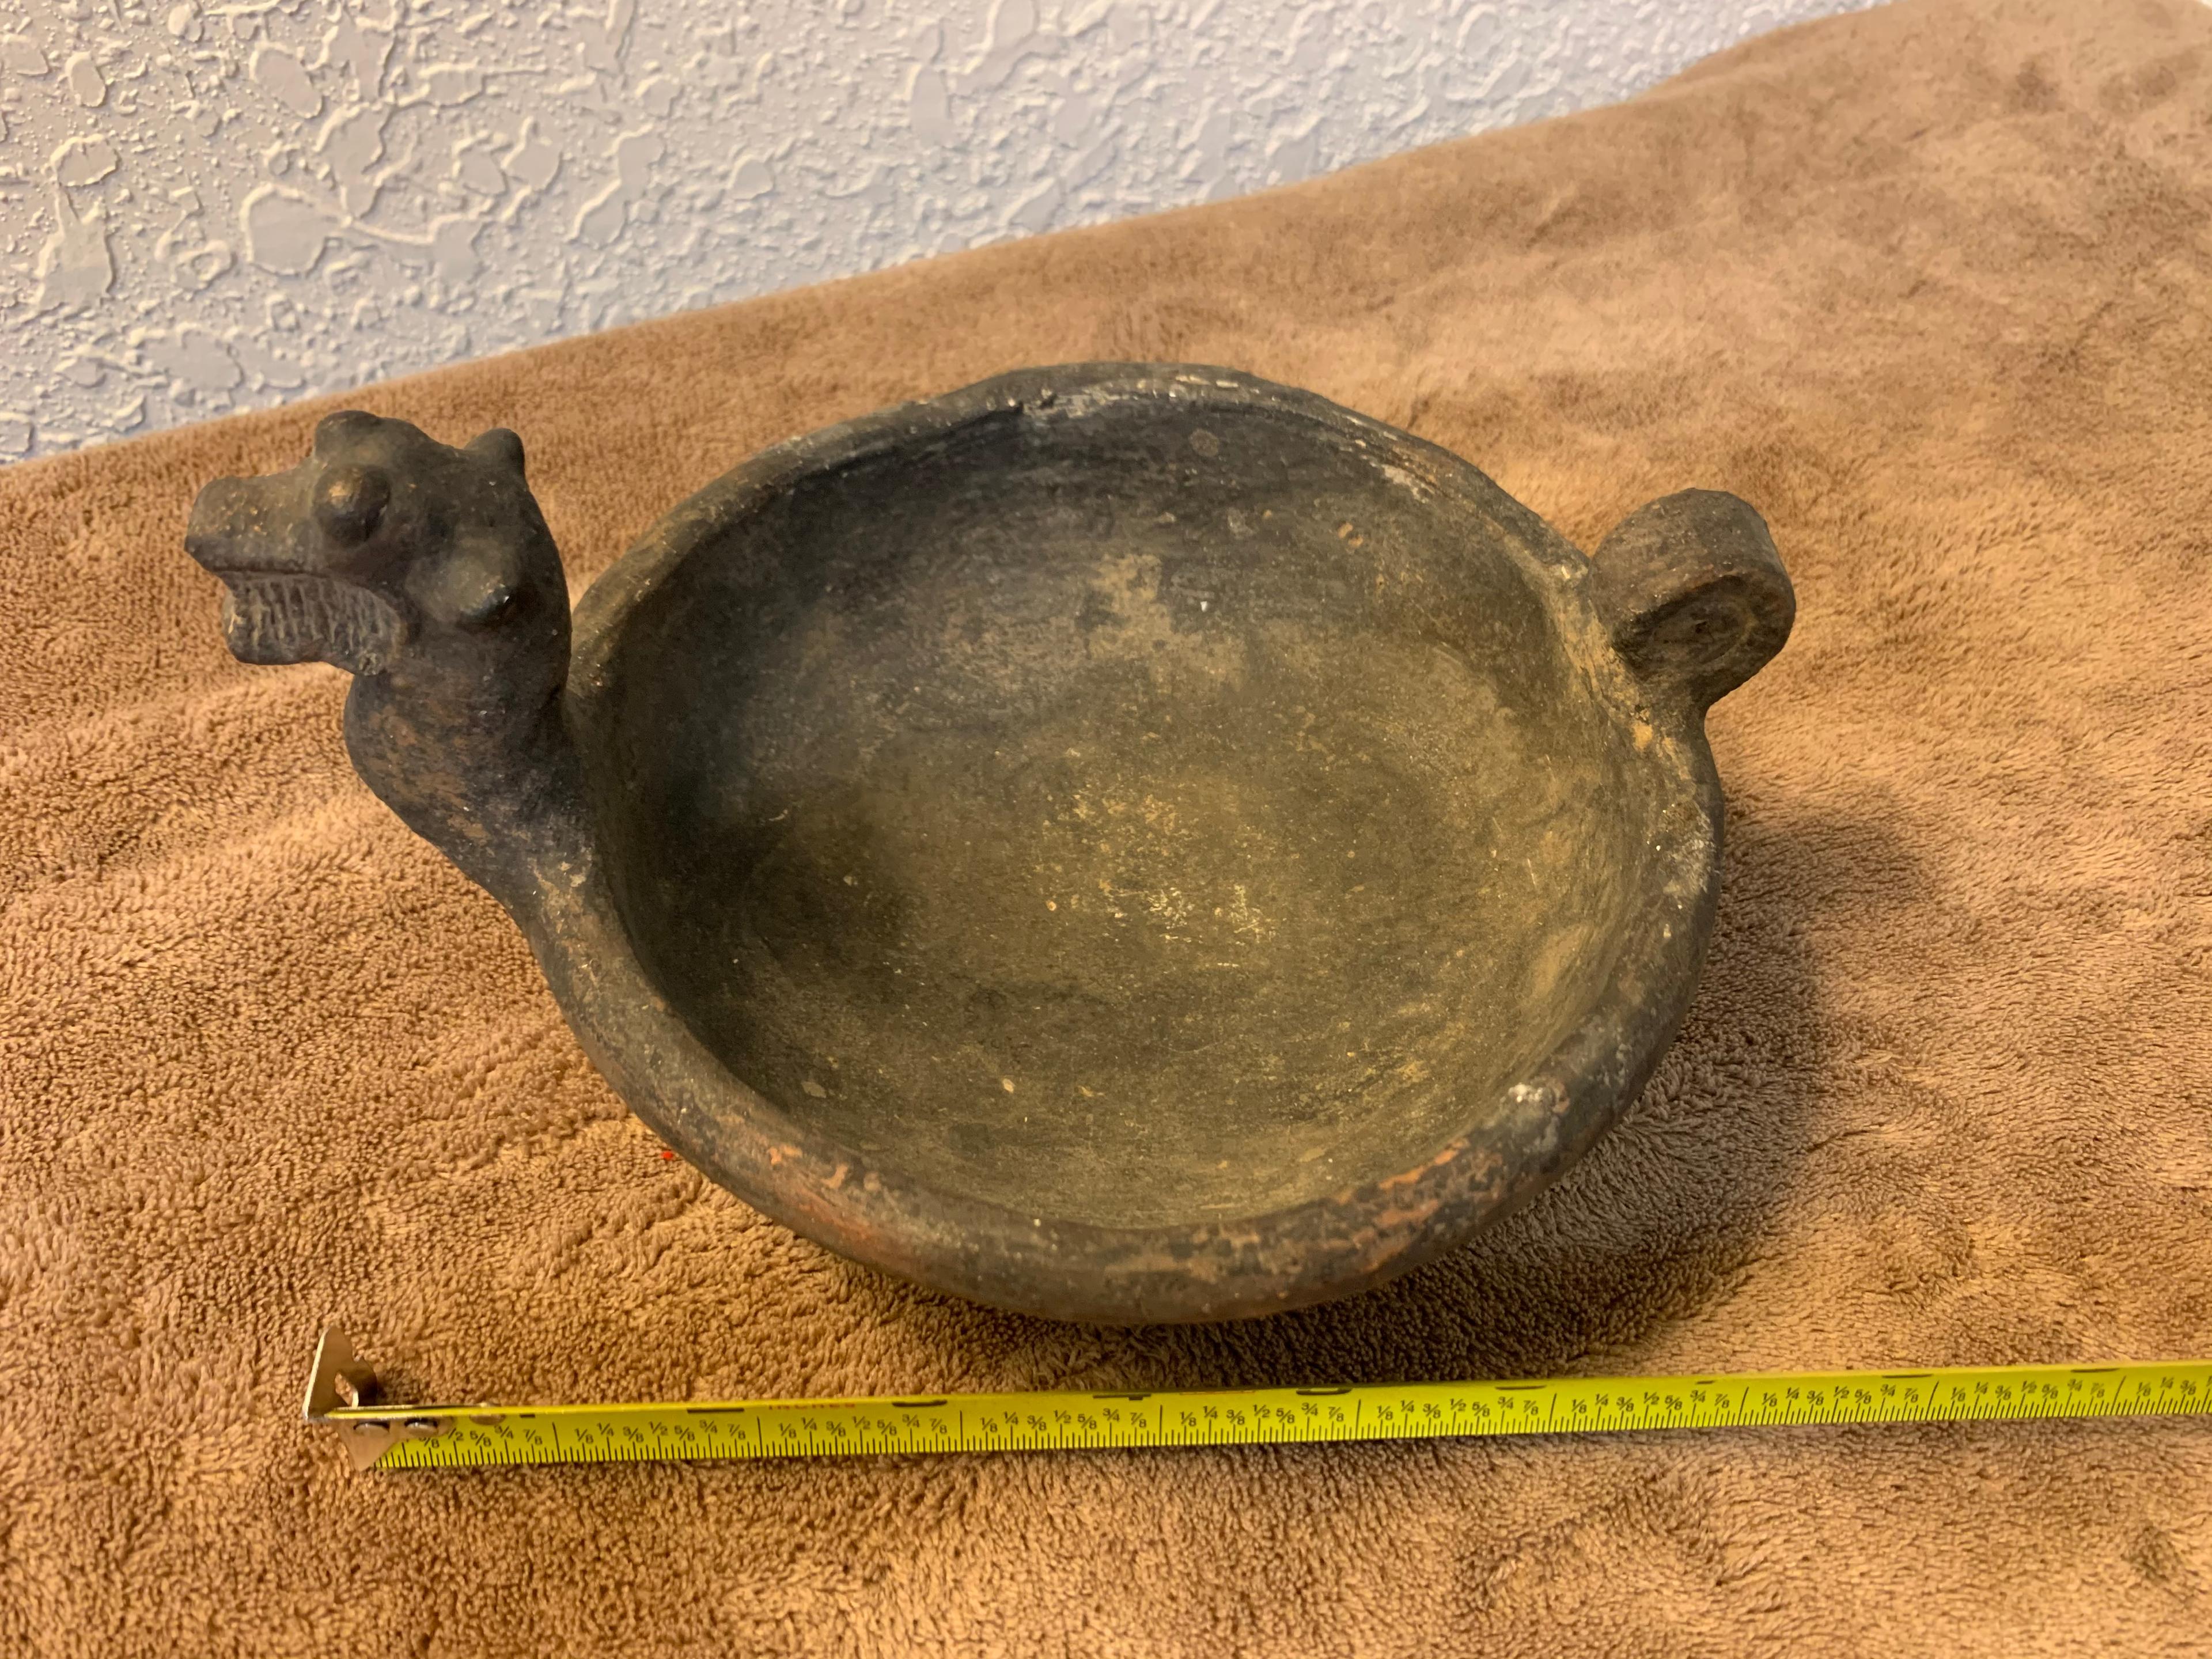 Unique Animal Effigy Vessel Bowl Unknown Animal With Tail Possibly A Dog